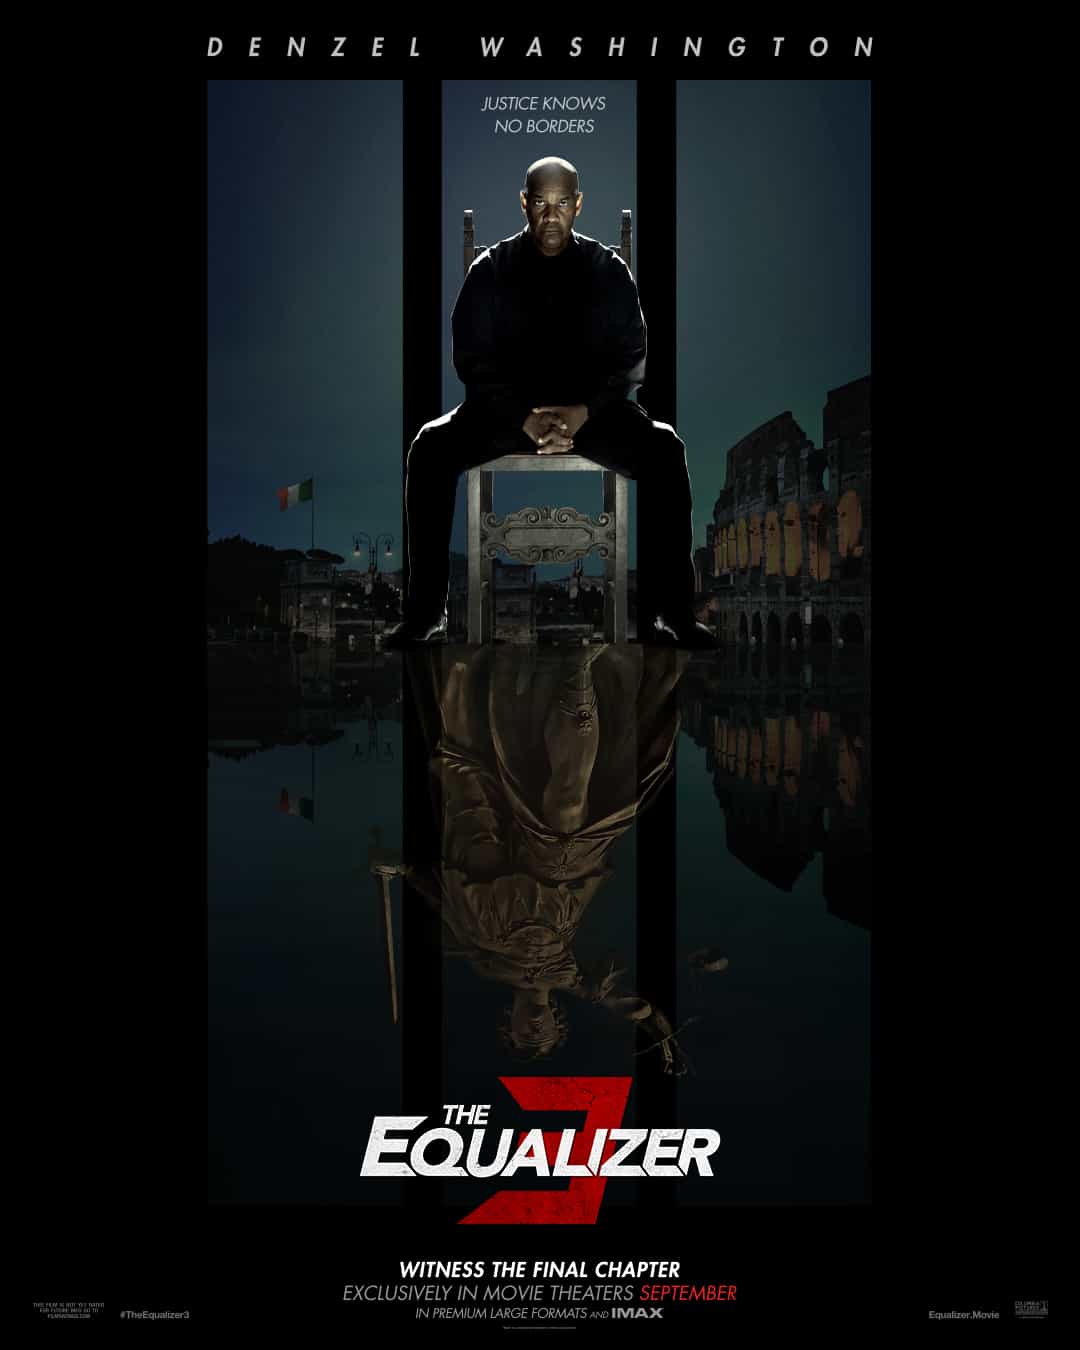 UK Box Office Weekend Report 1st - 3rd September 2023:  The Equalizer 3 replaces Barbie at the top of the UK box office after a 6 week run at the top